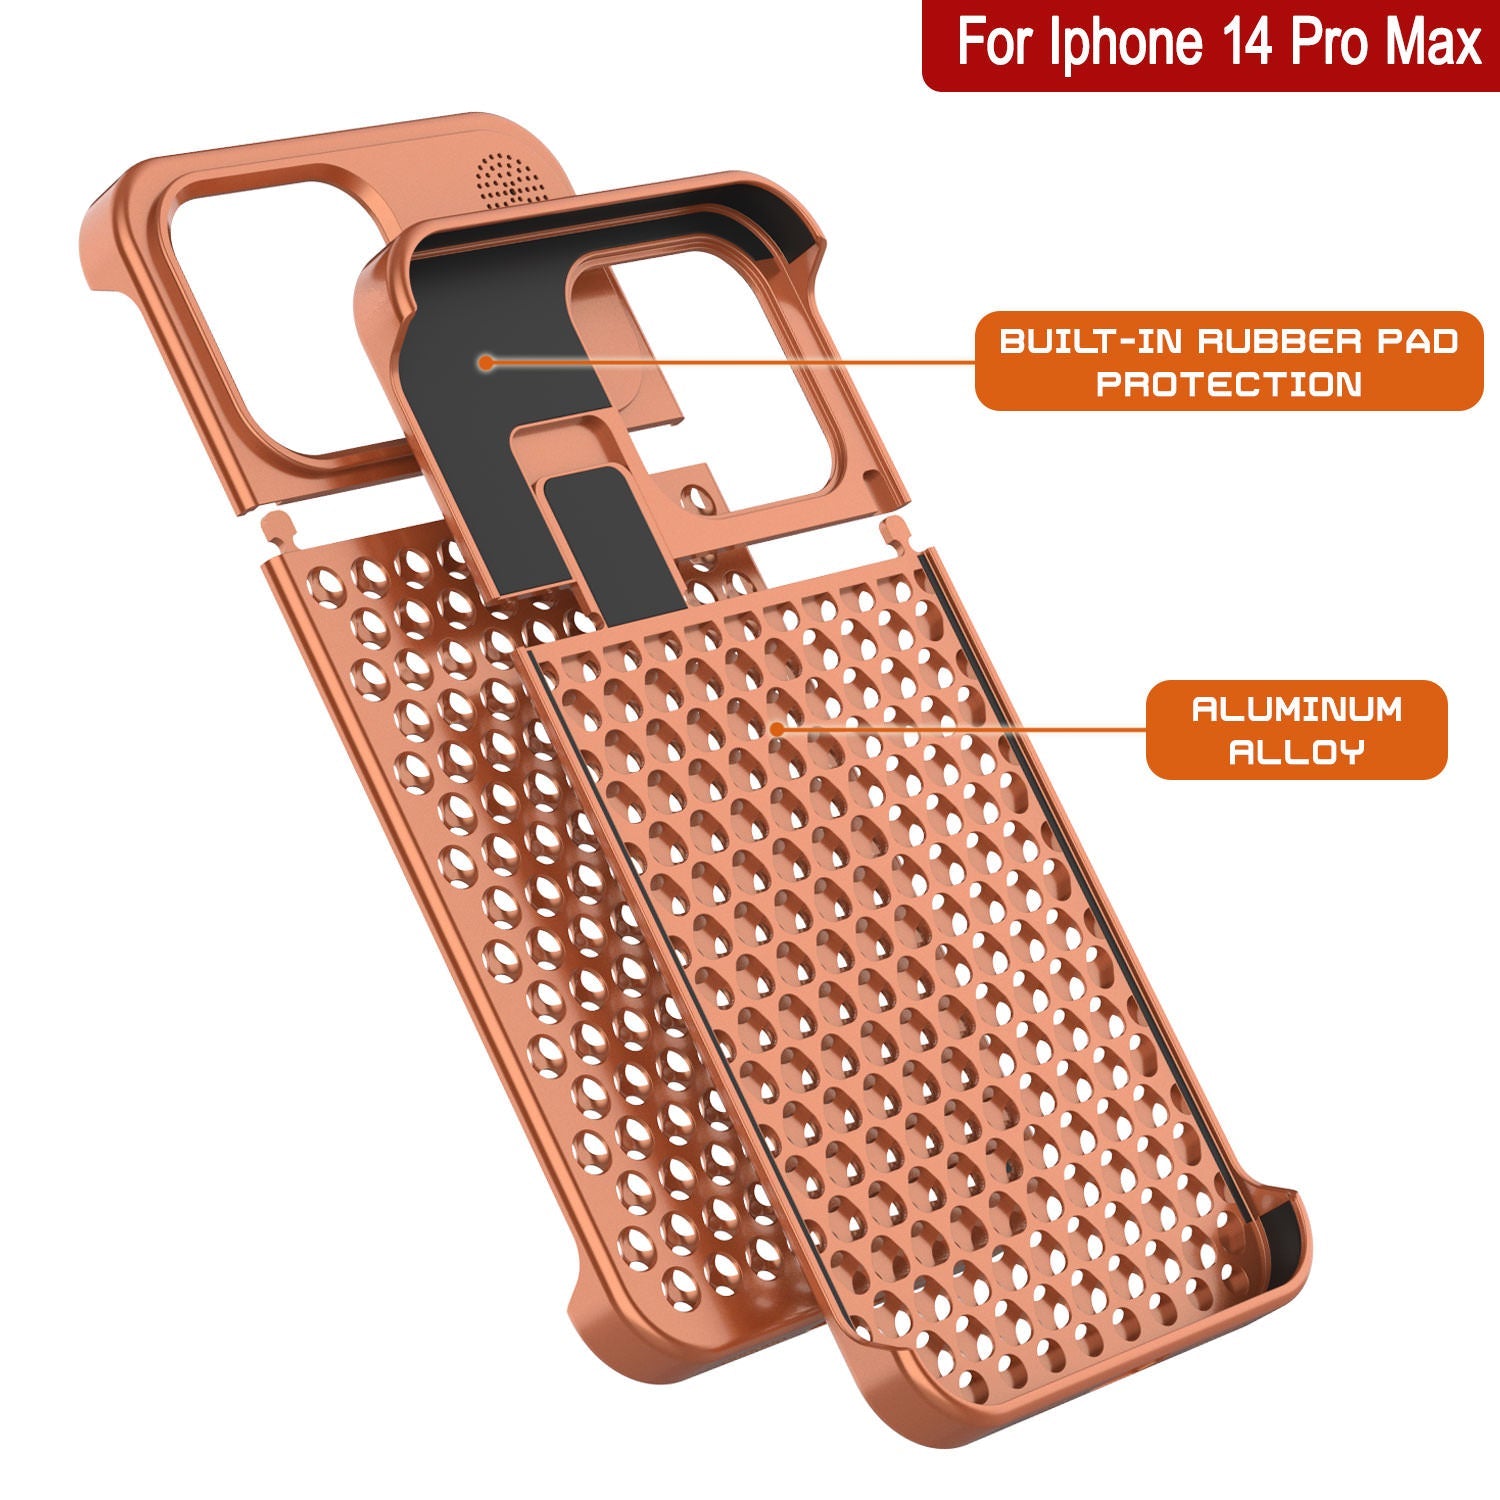 PunkCase for iPhone 14 Pro Max Aluminum Alloy Case [Fortifier Extreme Series] Ultra Durable Cover [Orange]